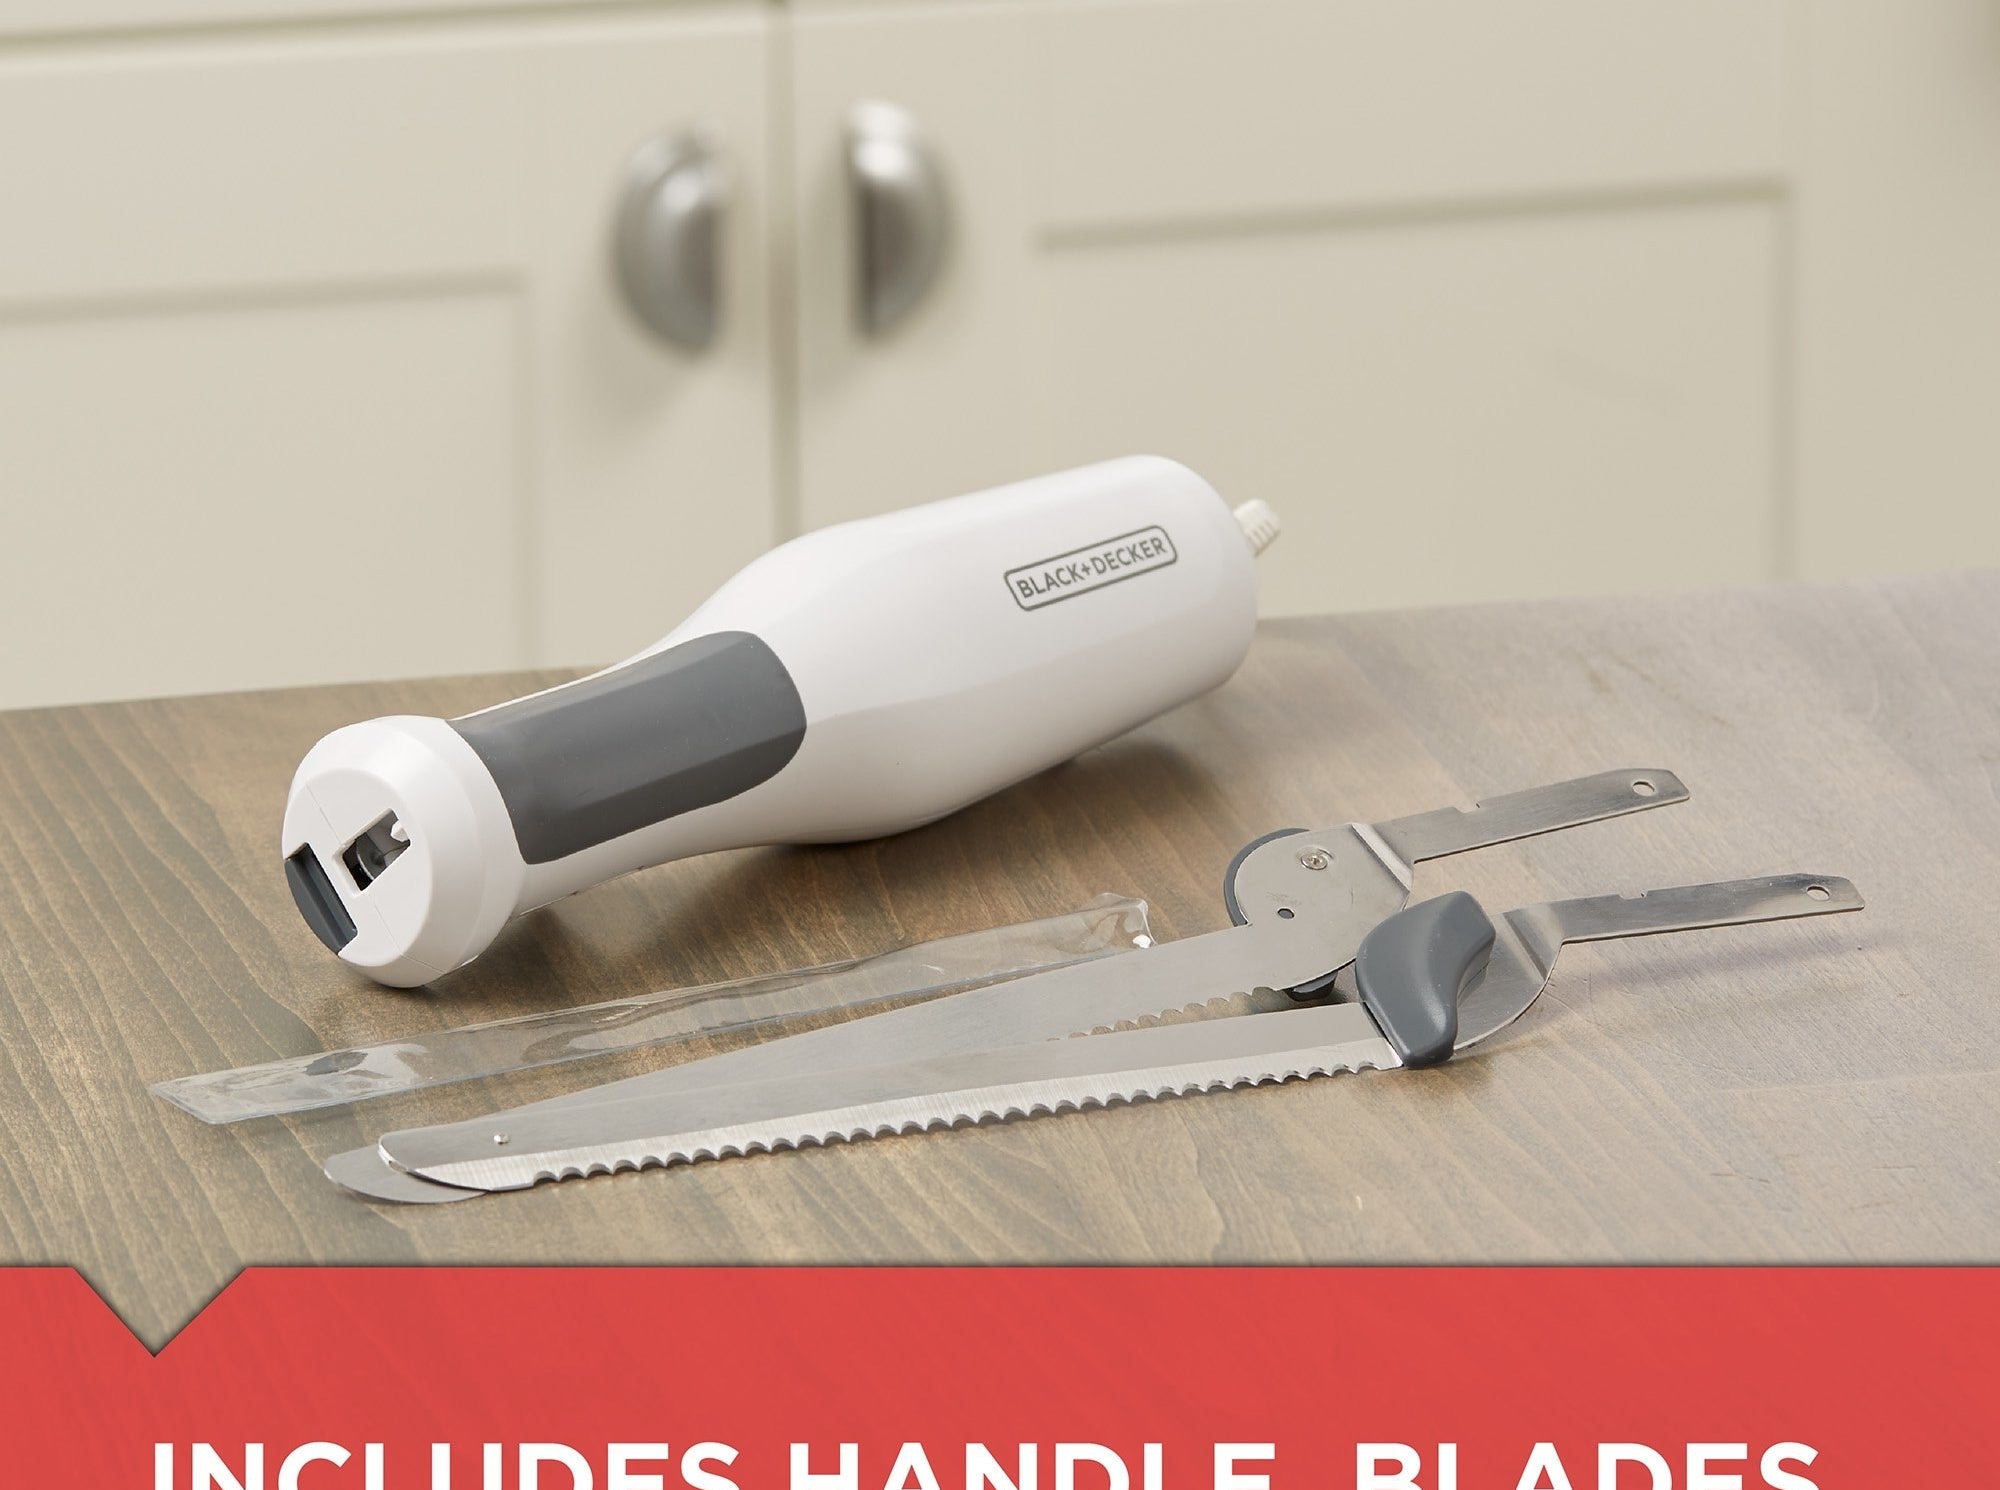 the electric carving knife